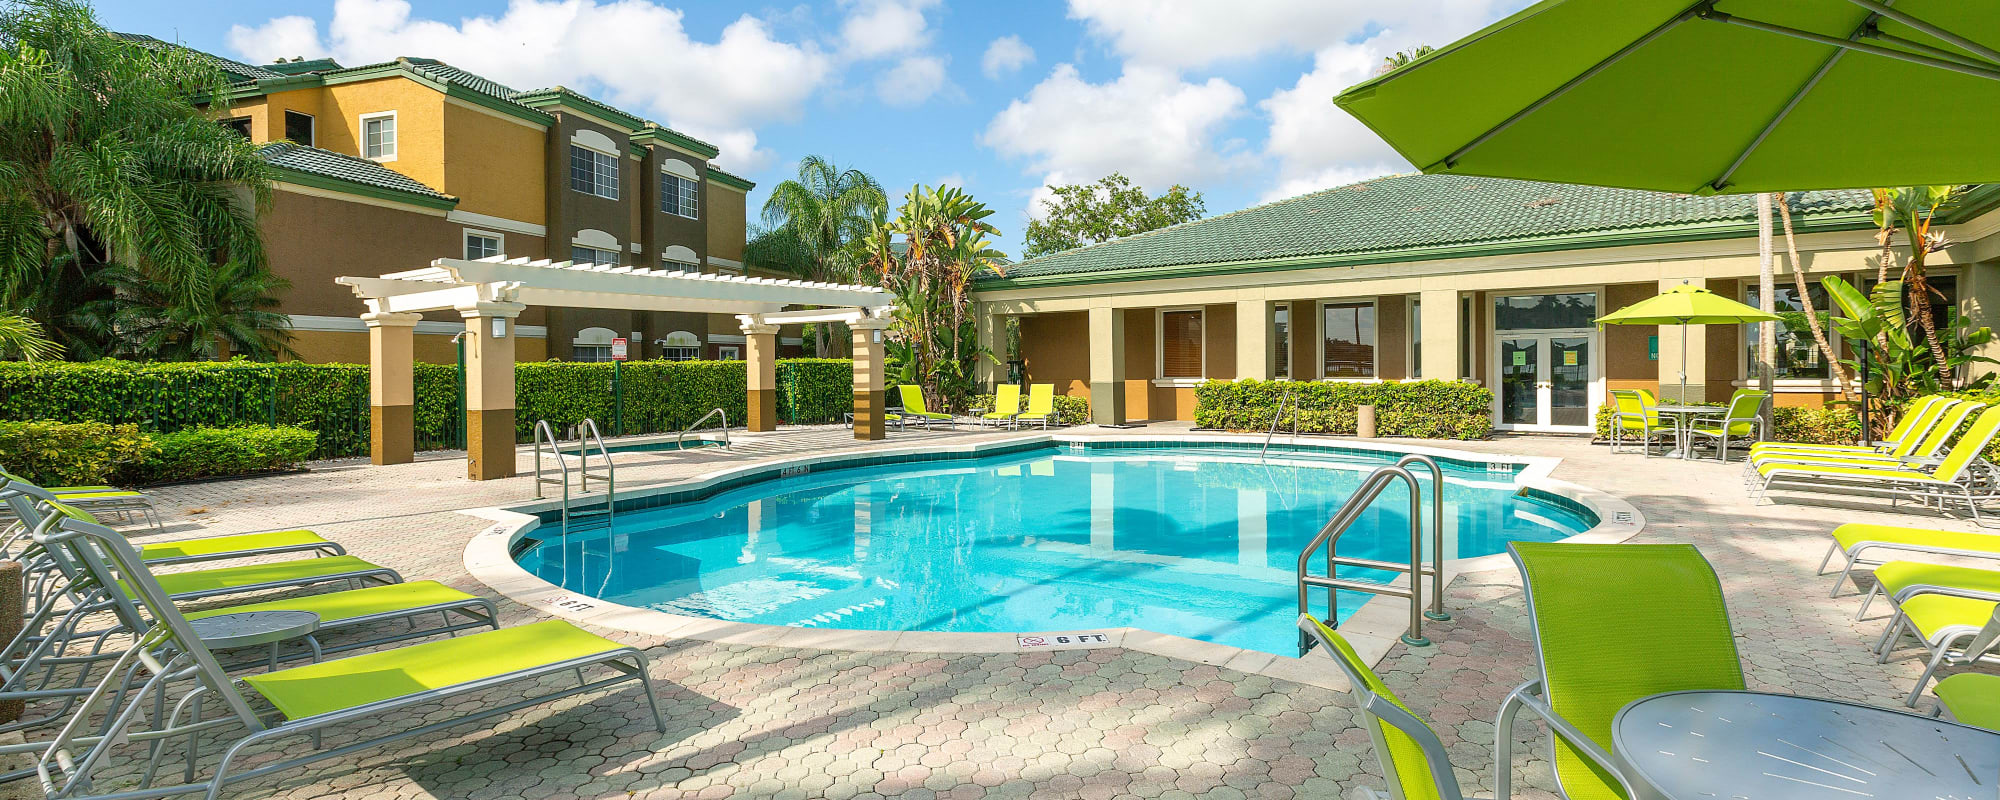 Amenities at Club Lake Pointe Apartments in Coral Springs, Florida